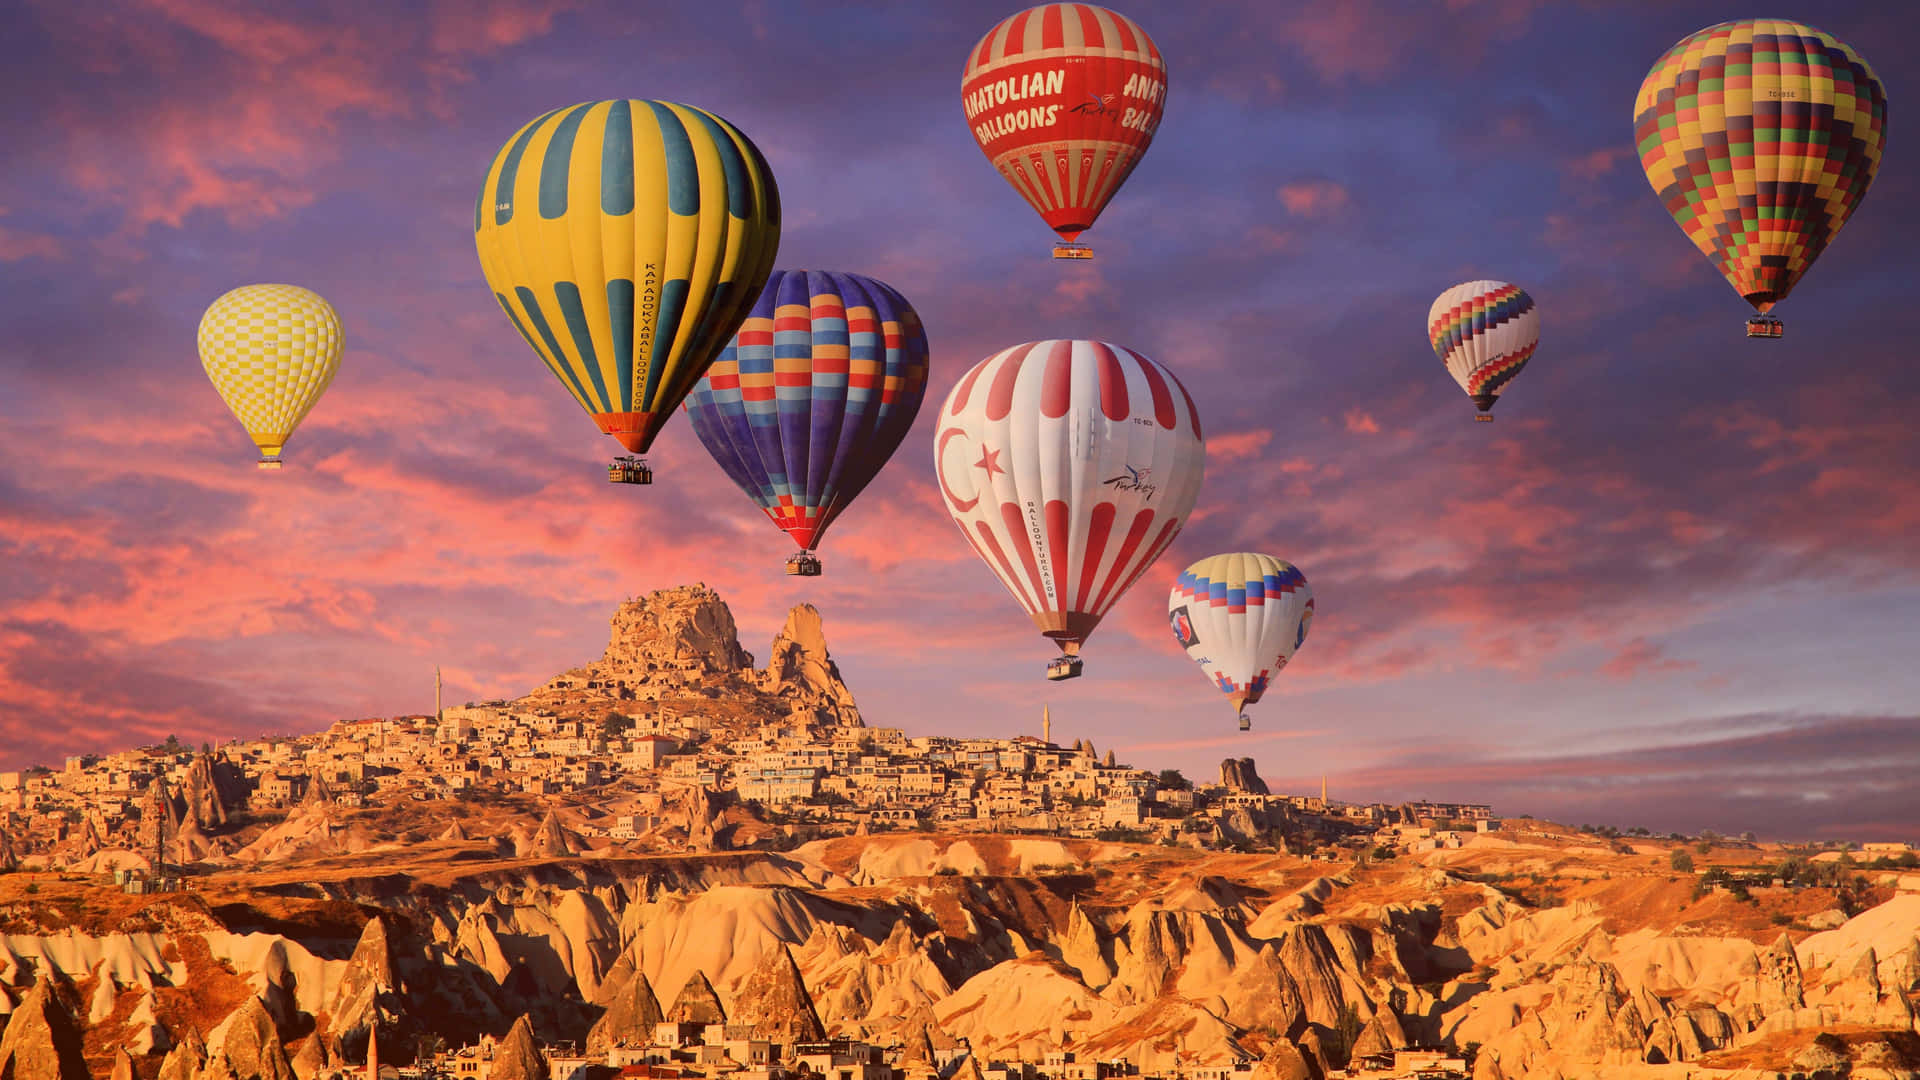 Take a journey in the sky with a Hot Air Balloon!